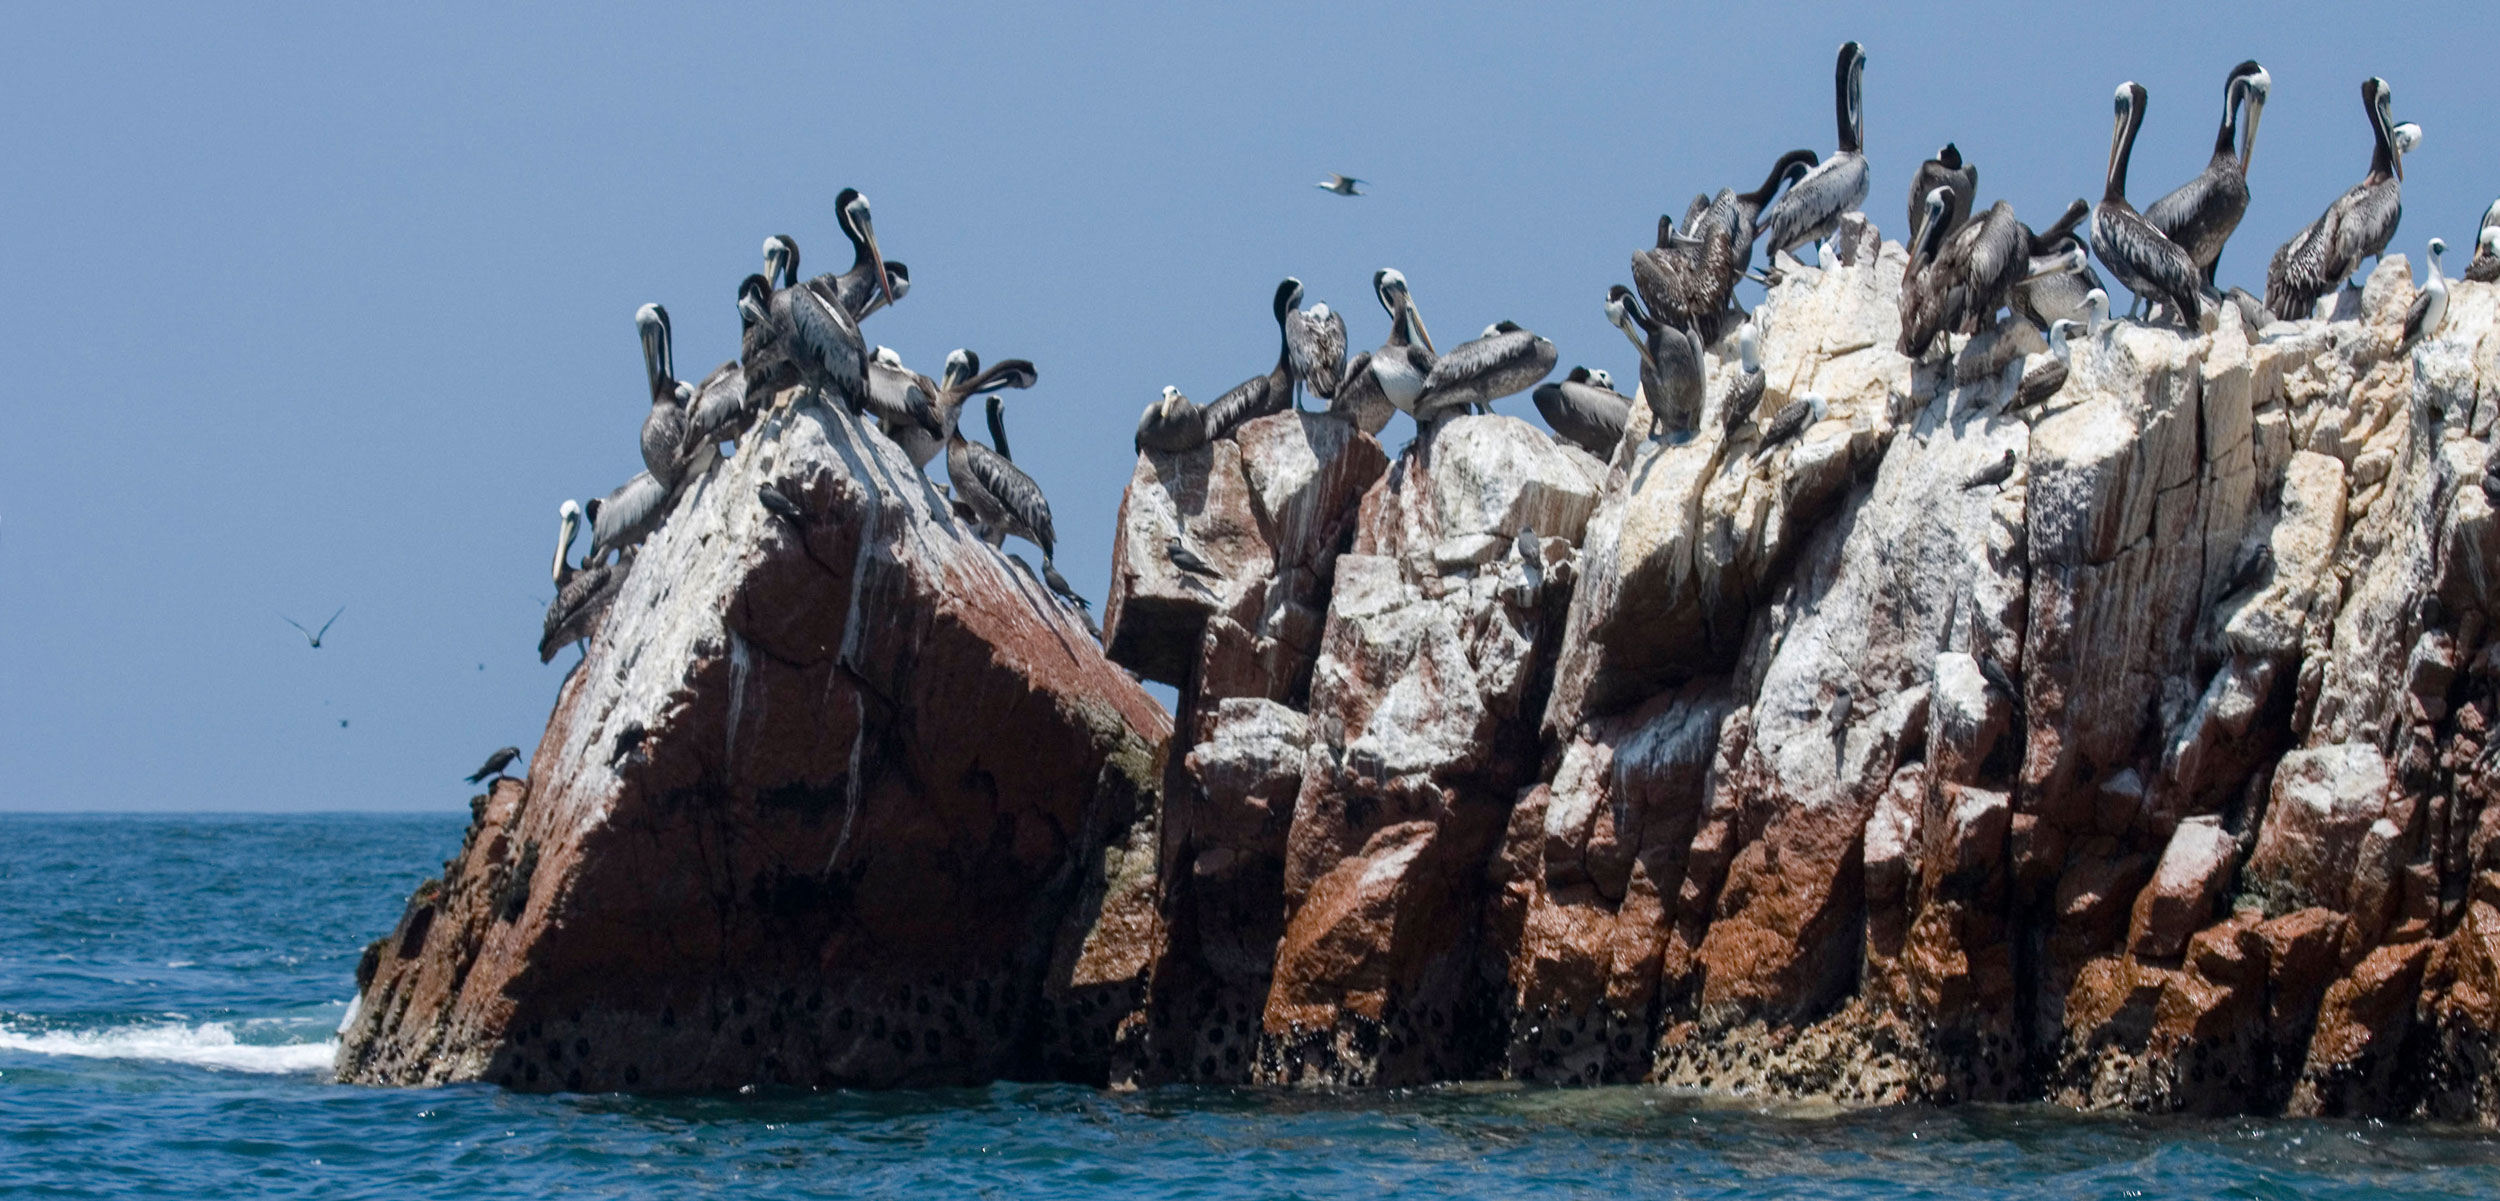 Pelicans sitting on the rocks on the Palomino Islands, just off the coast of Lima, Peru